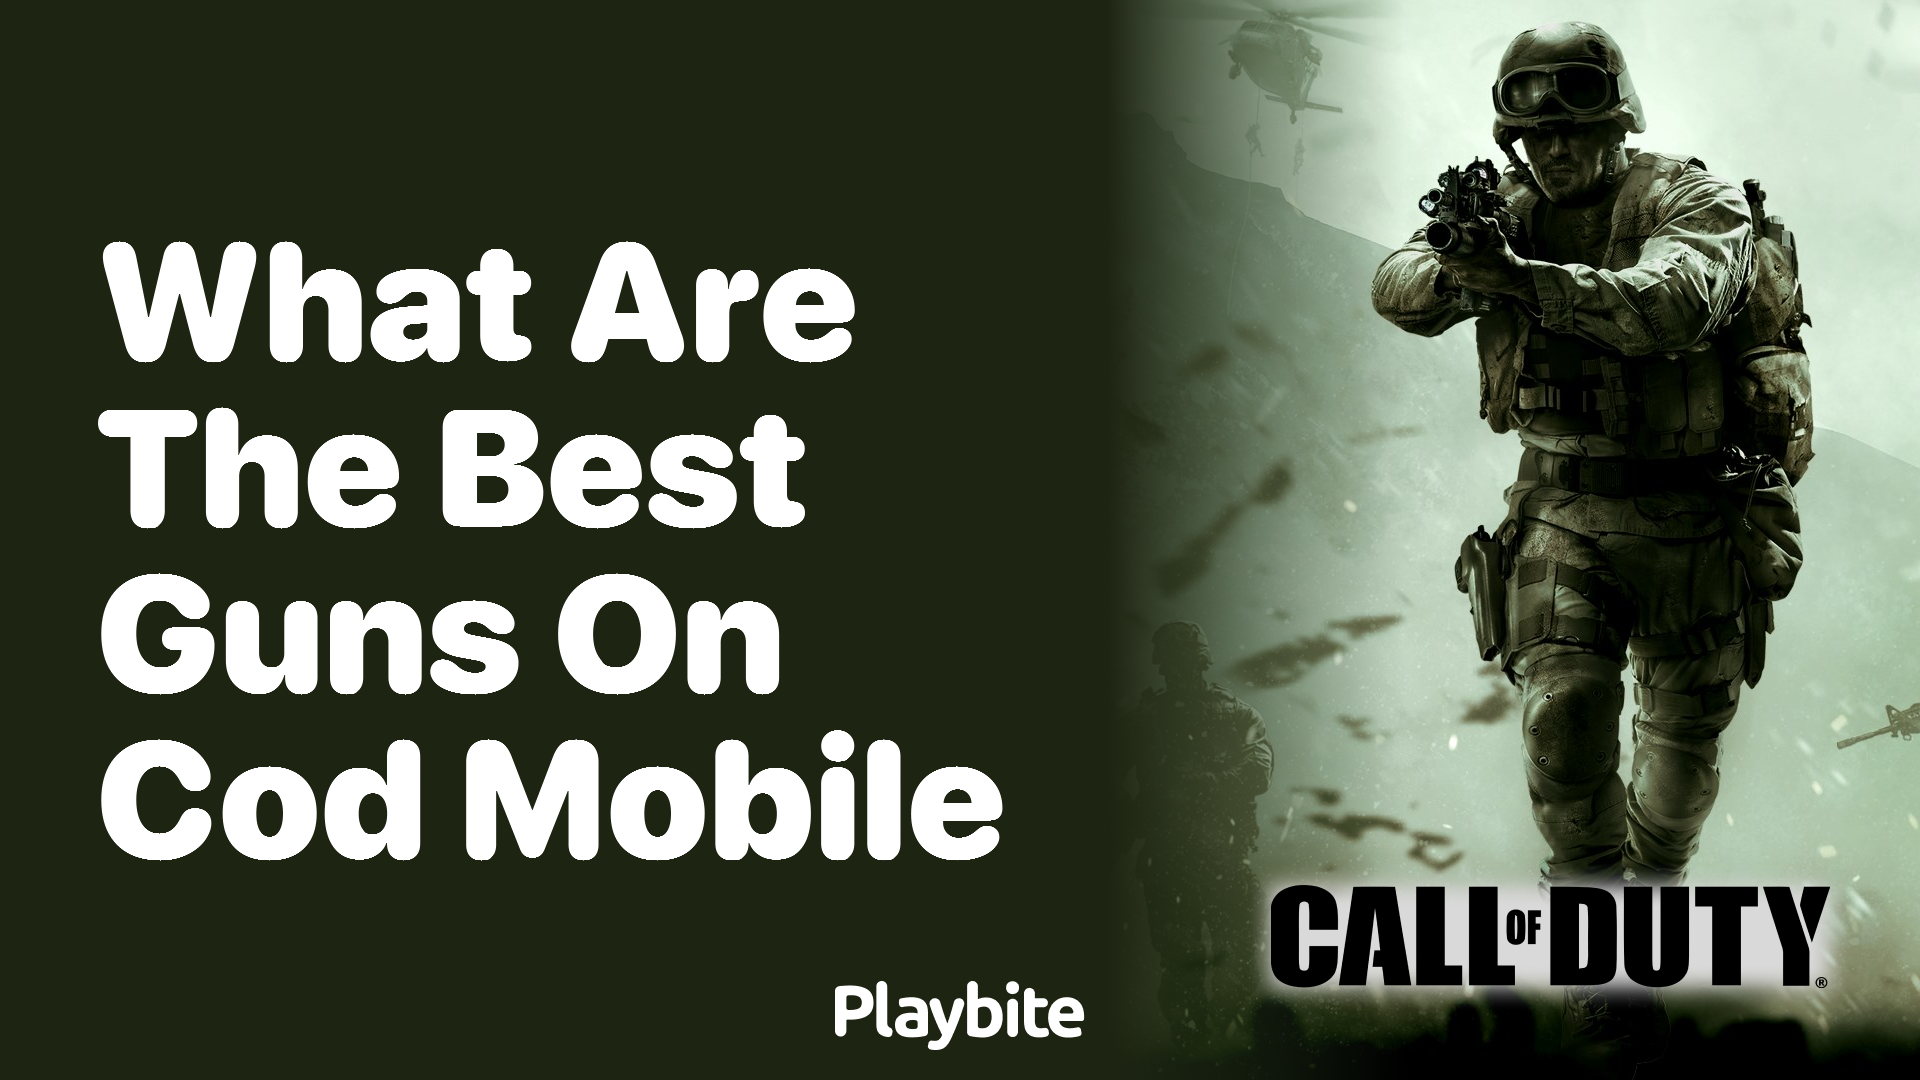 What Are the Best Guns on COD Mobile?